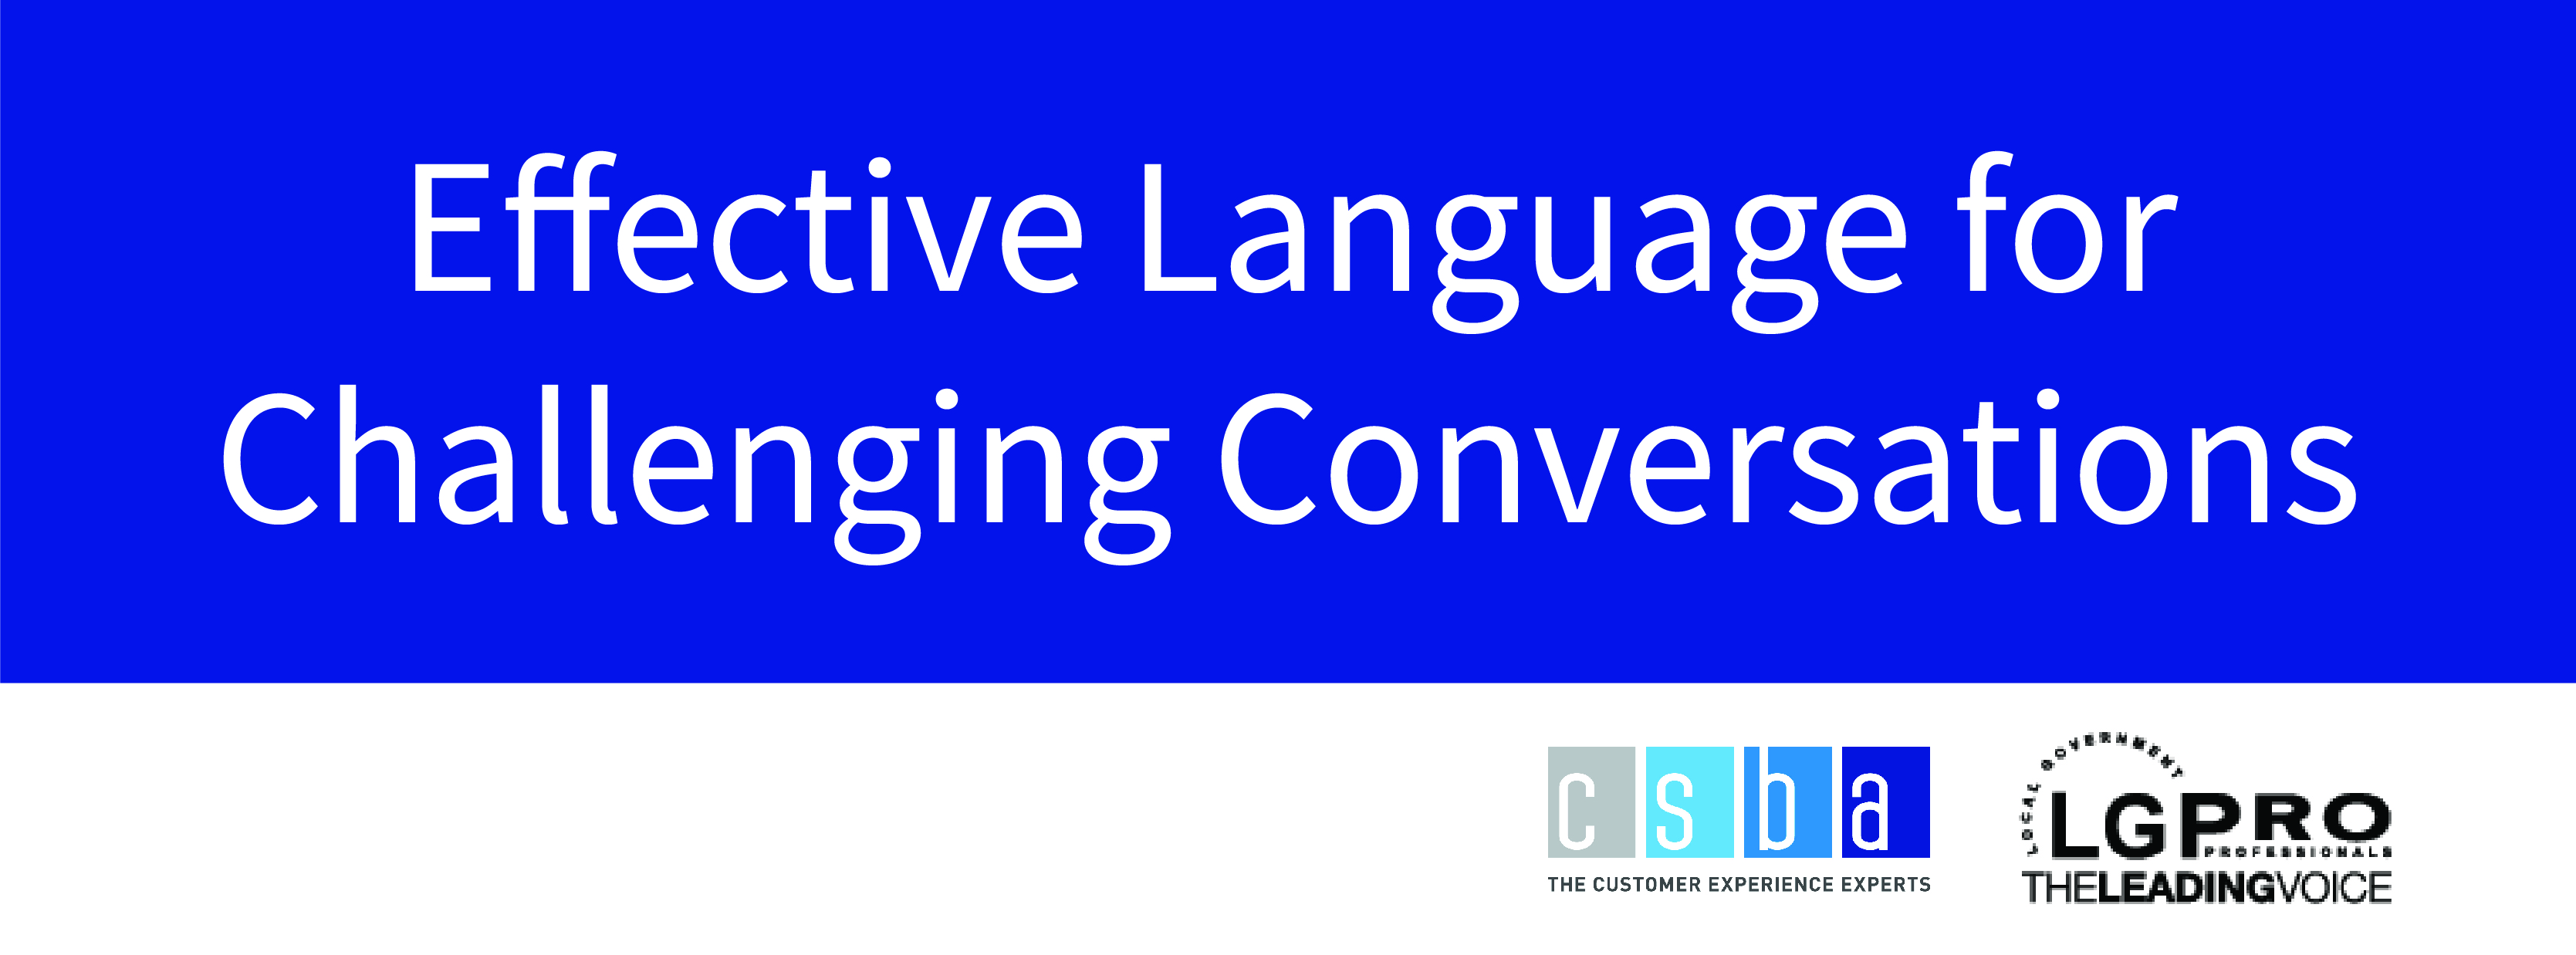 Effective Language for Challenging Conversations - FULL